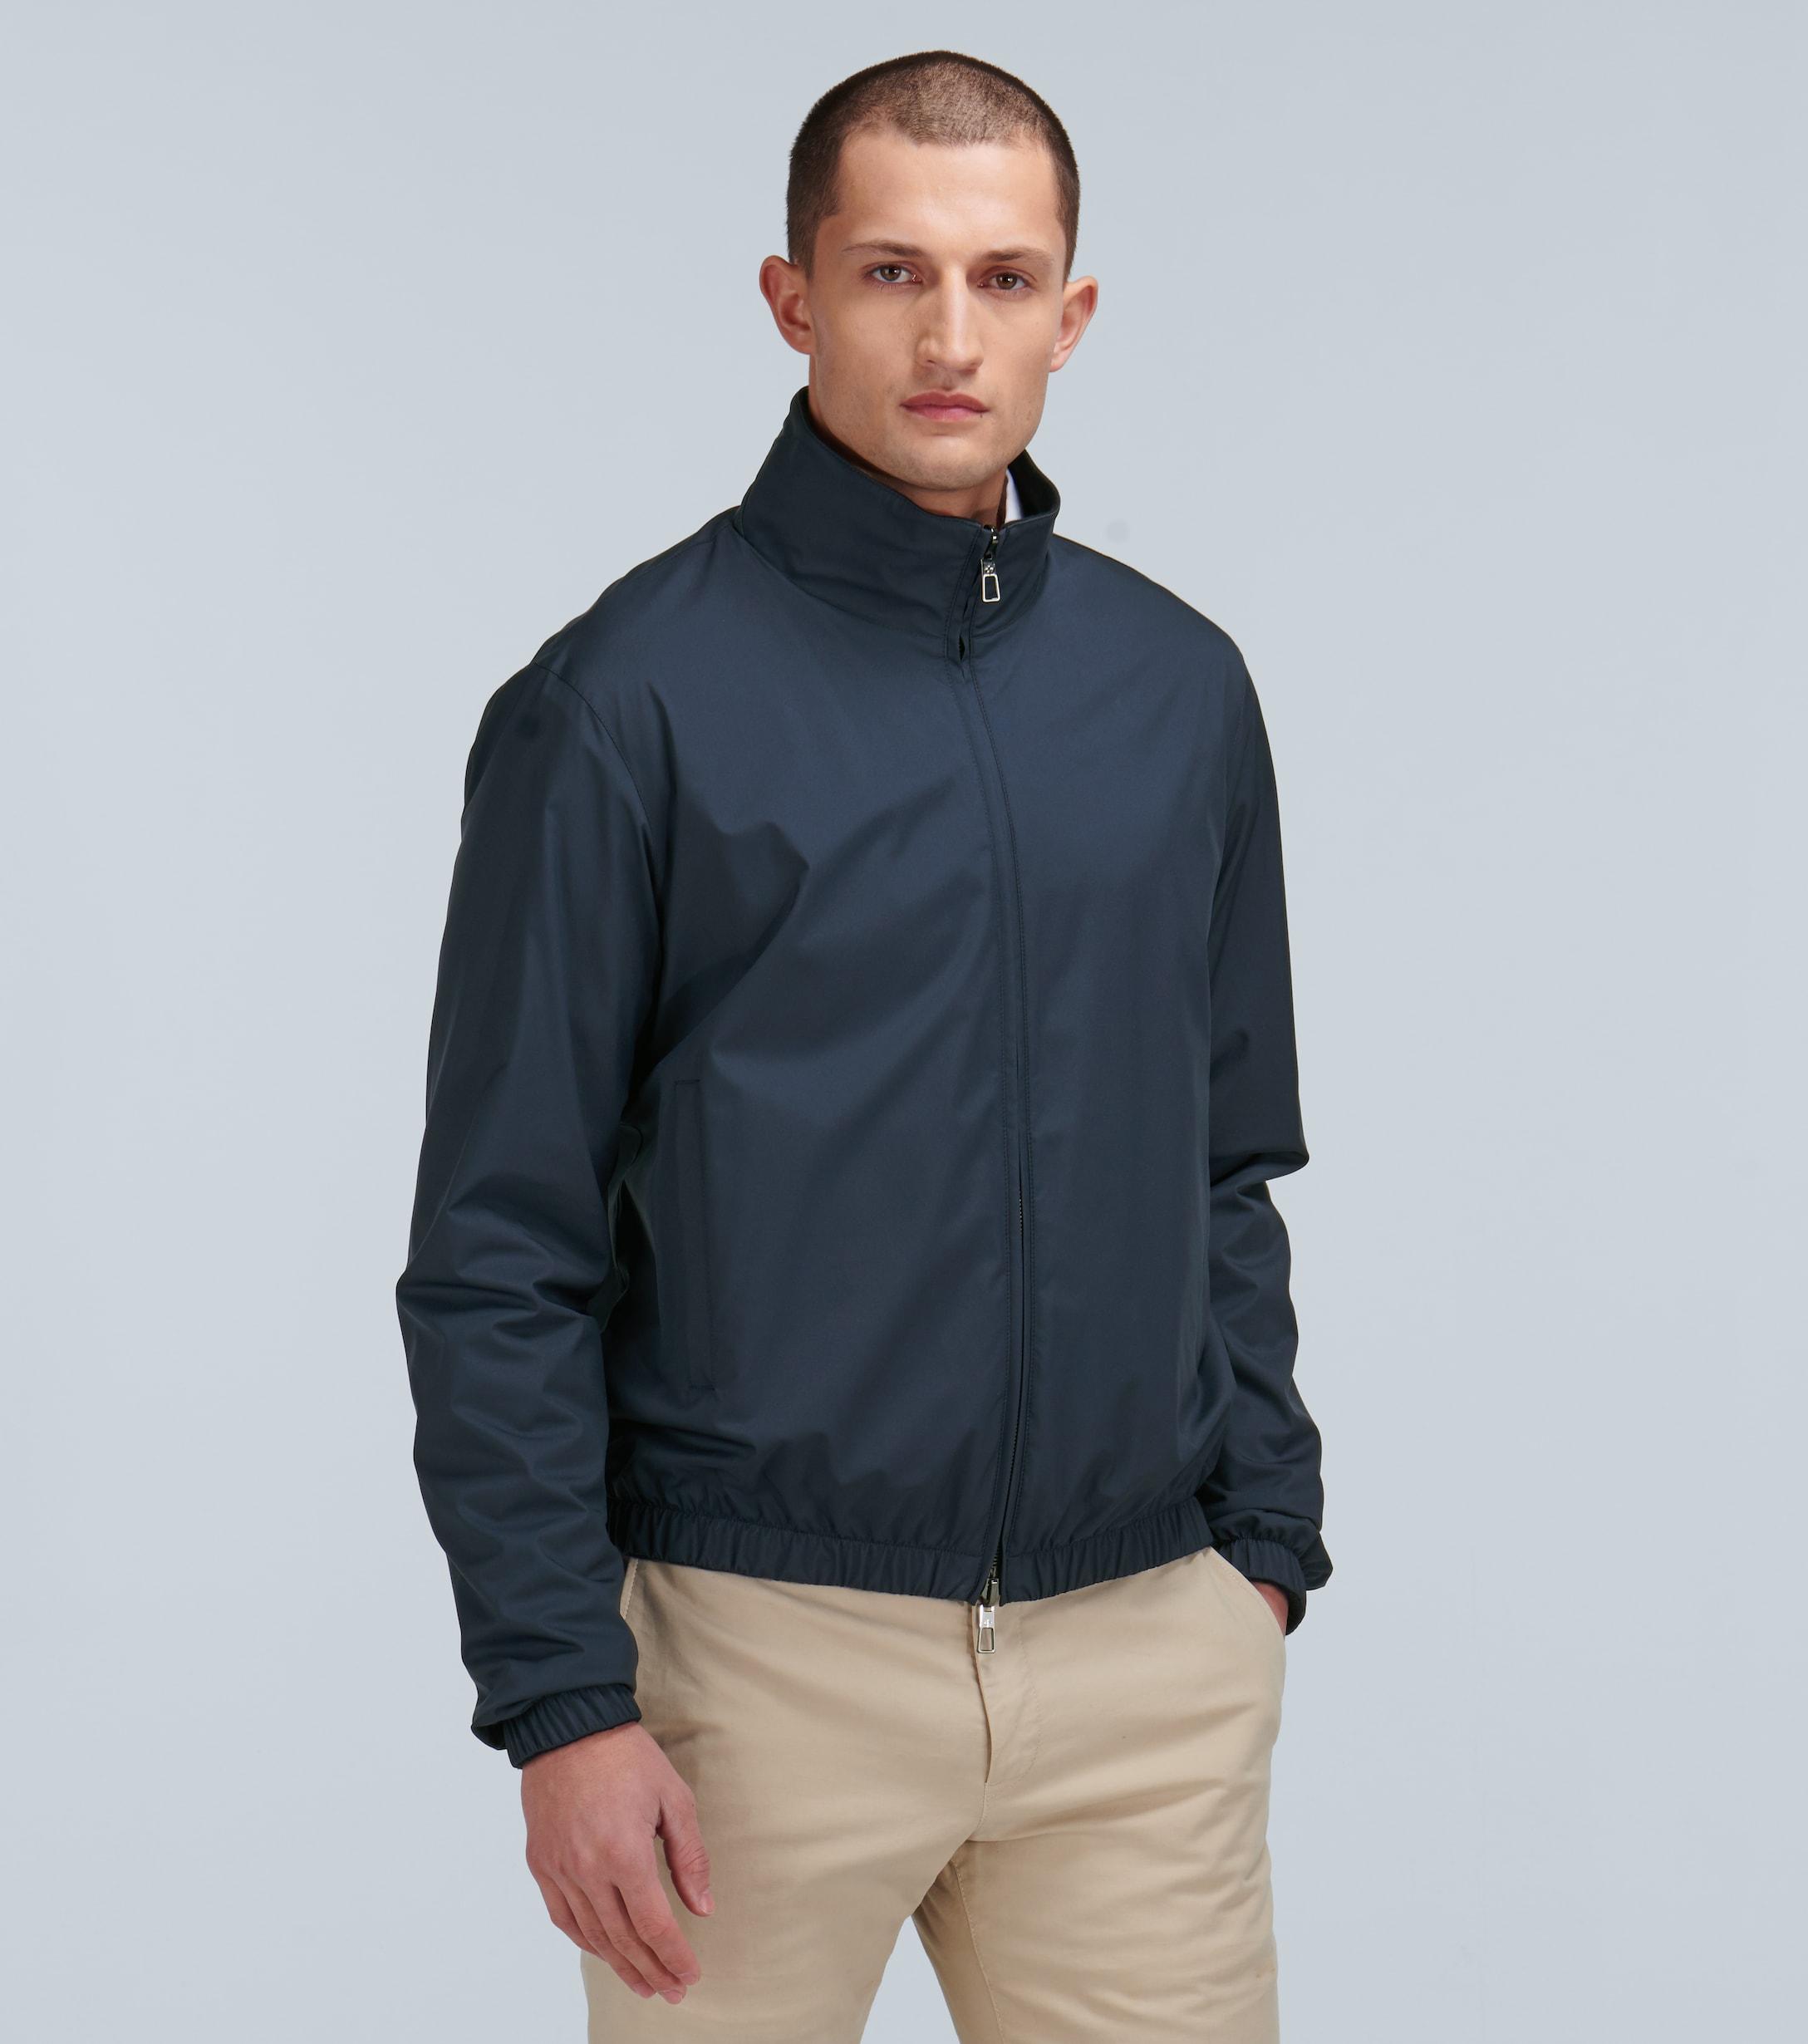 Loro Piana Cashmere Windmate Bomber Jacket in Blue for Men - Lyst